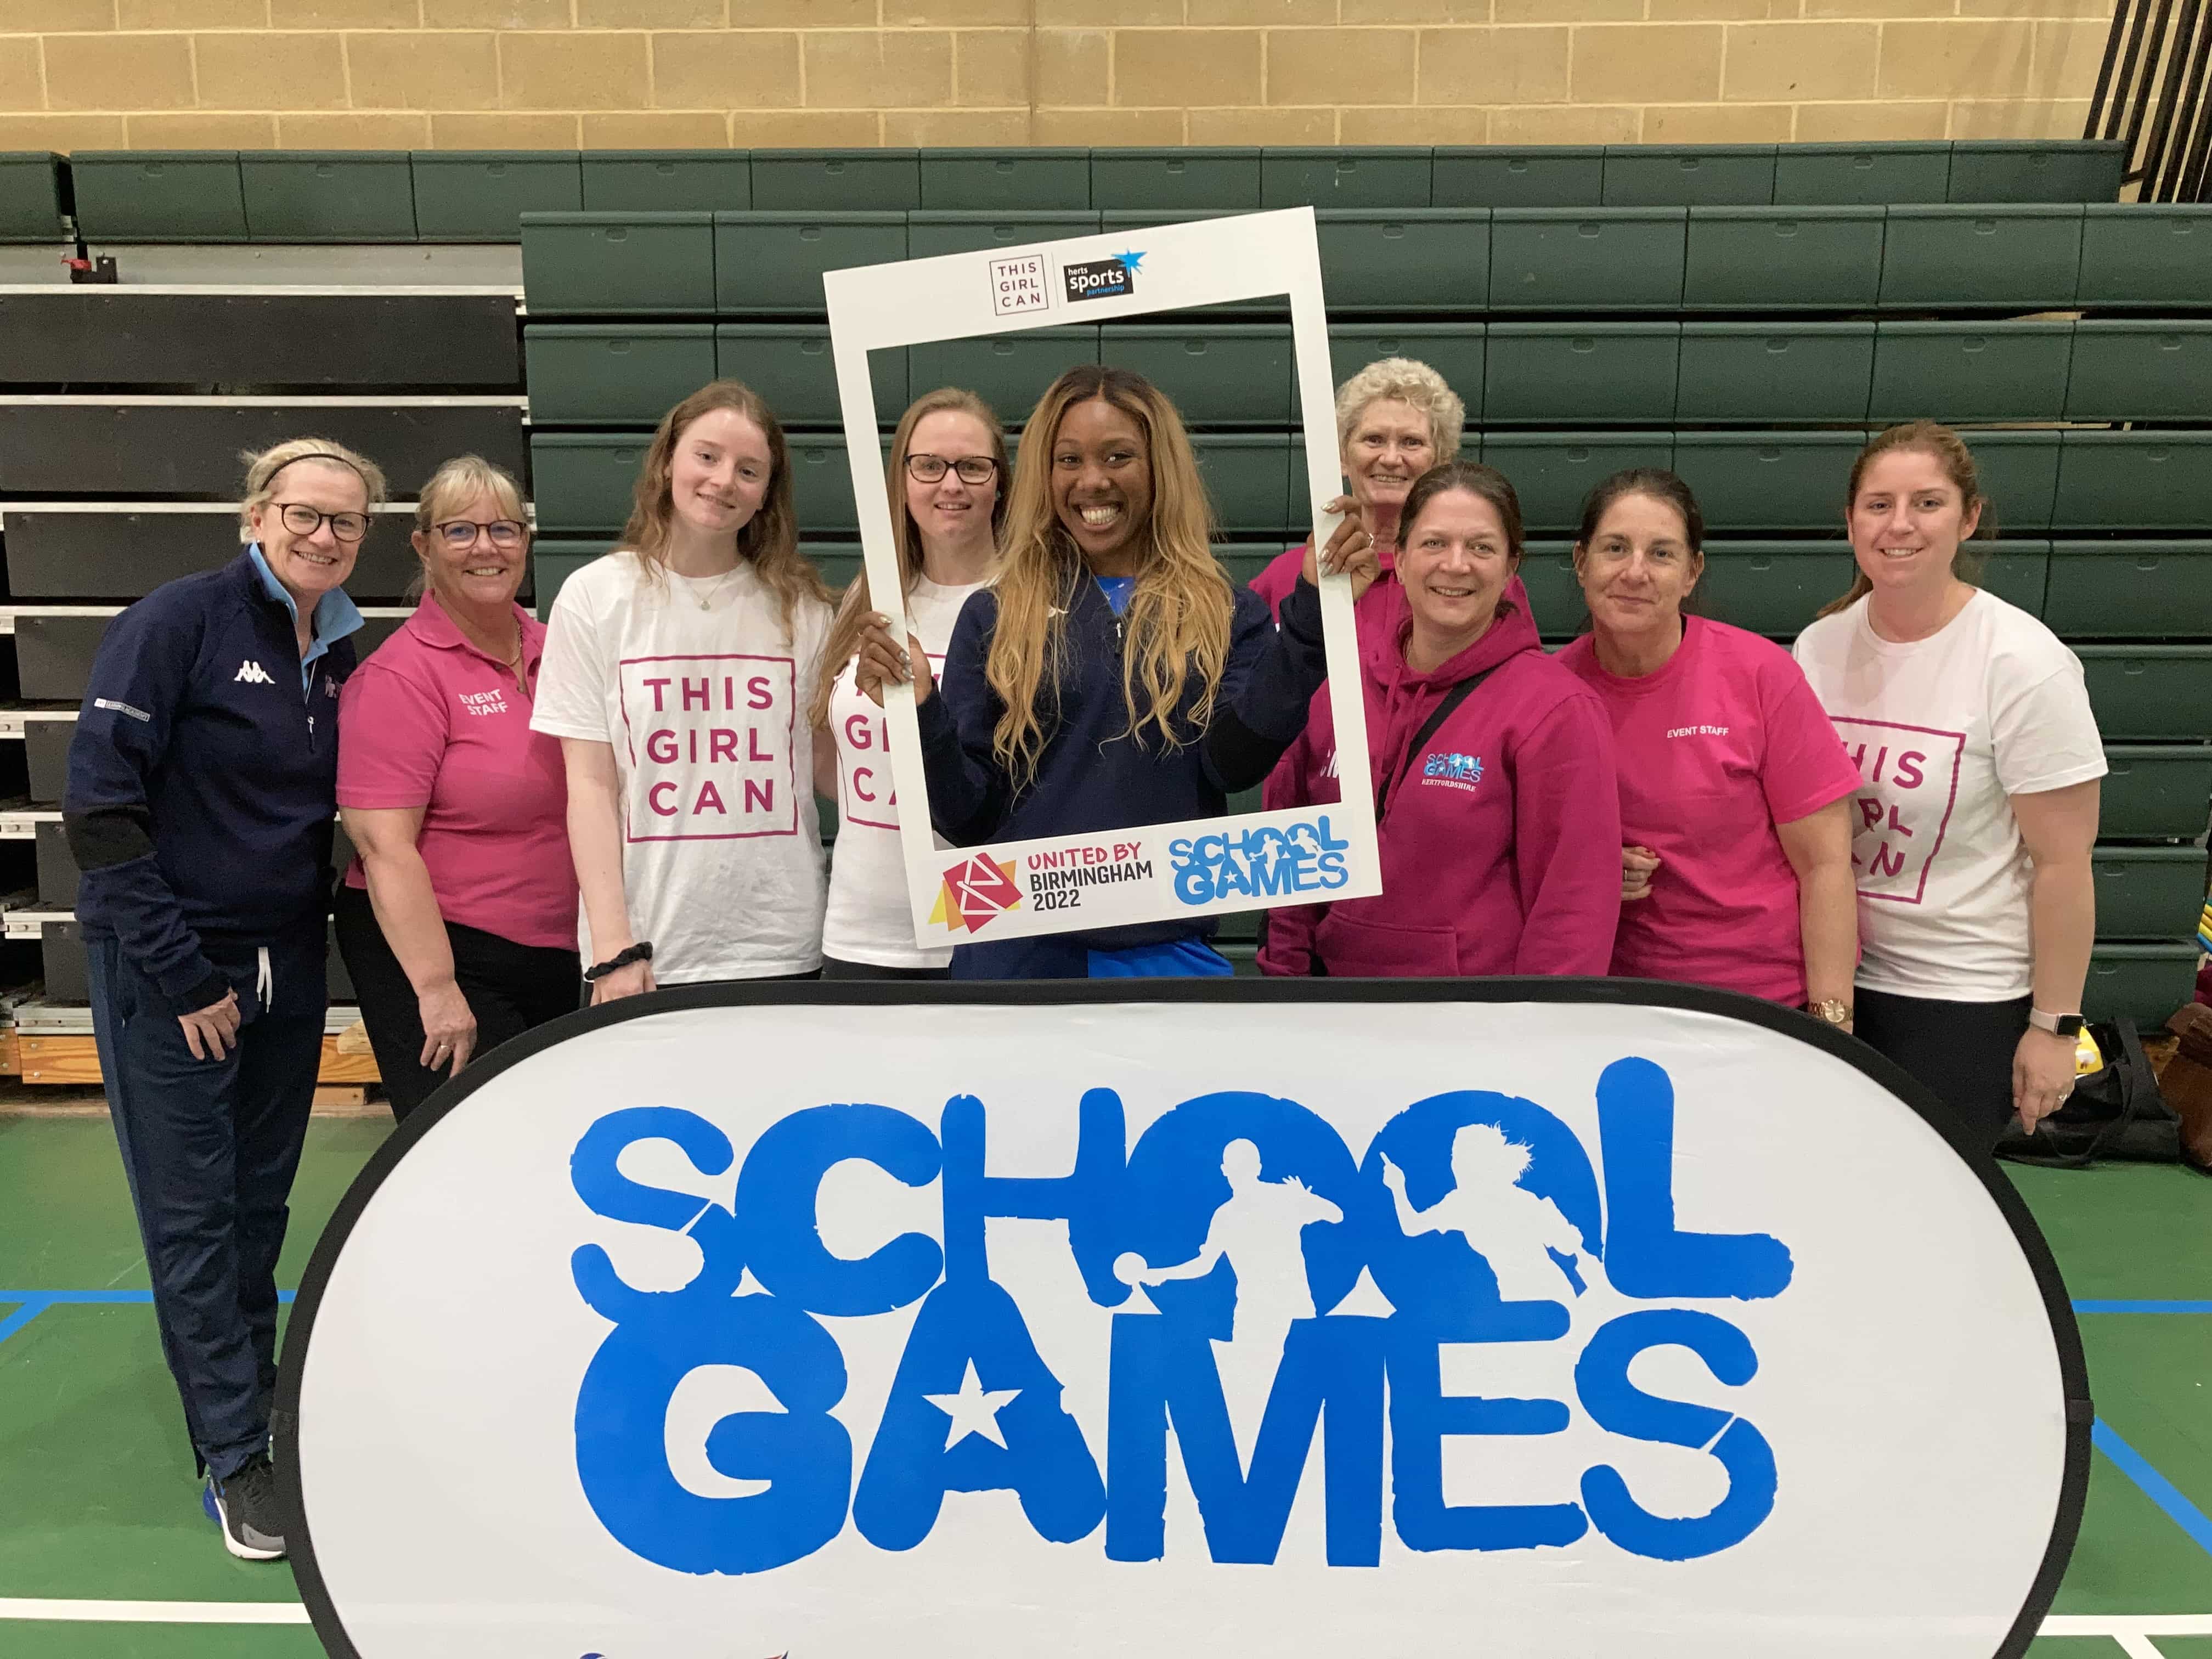 Group of girls with Montell Douglas standing behind a School, Games banner in a sports hall